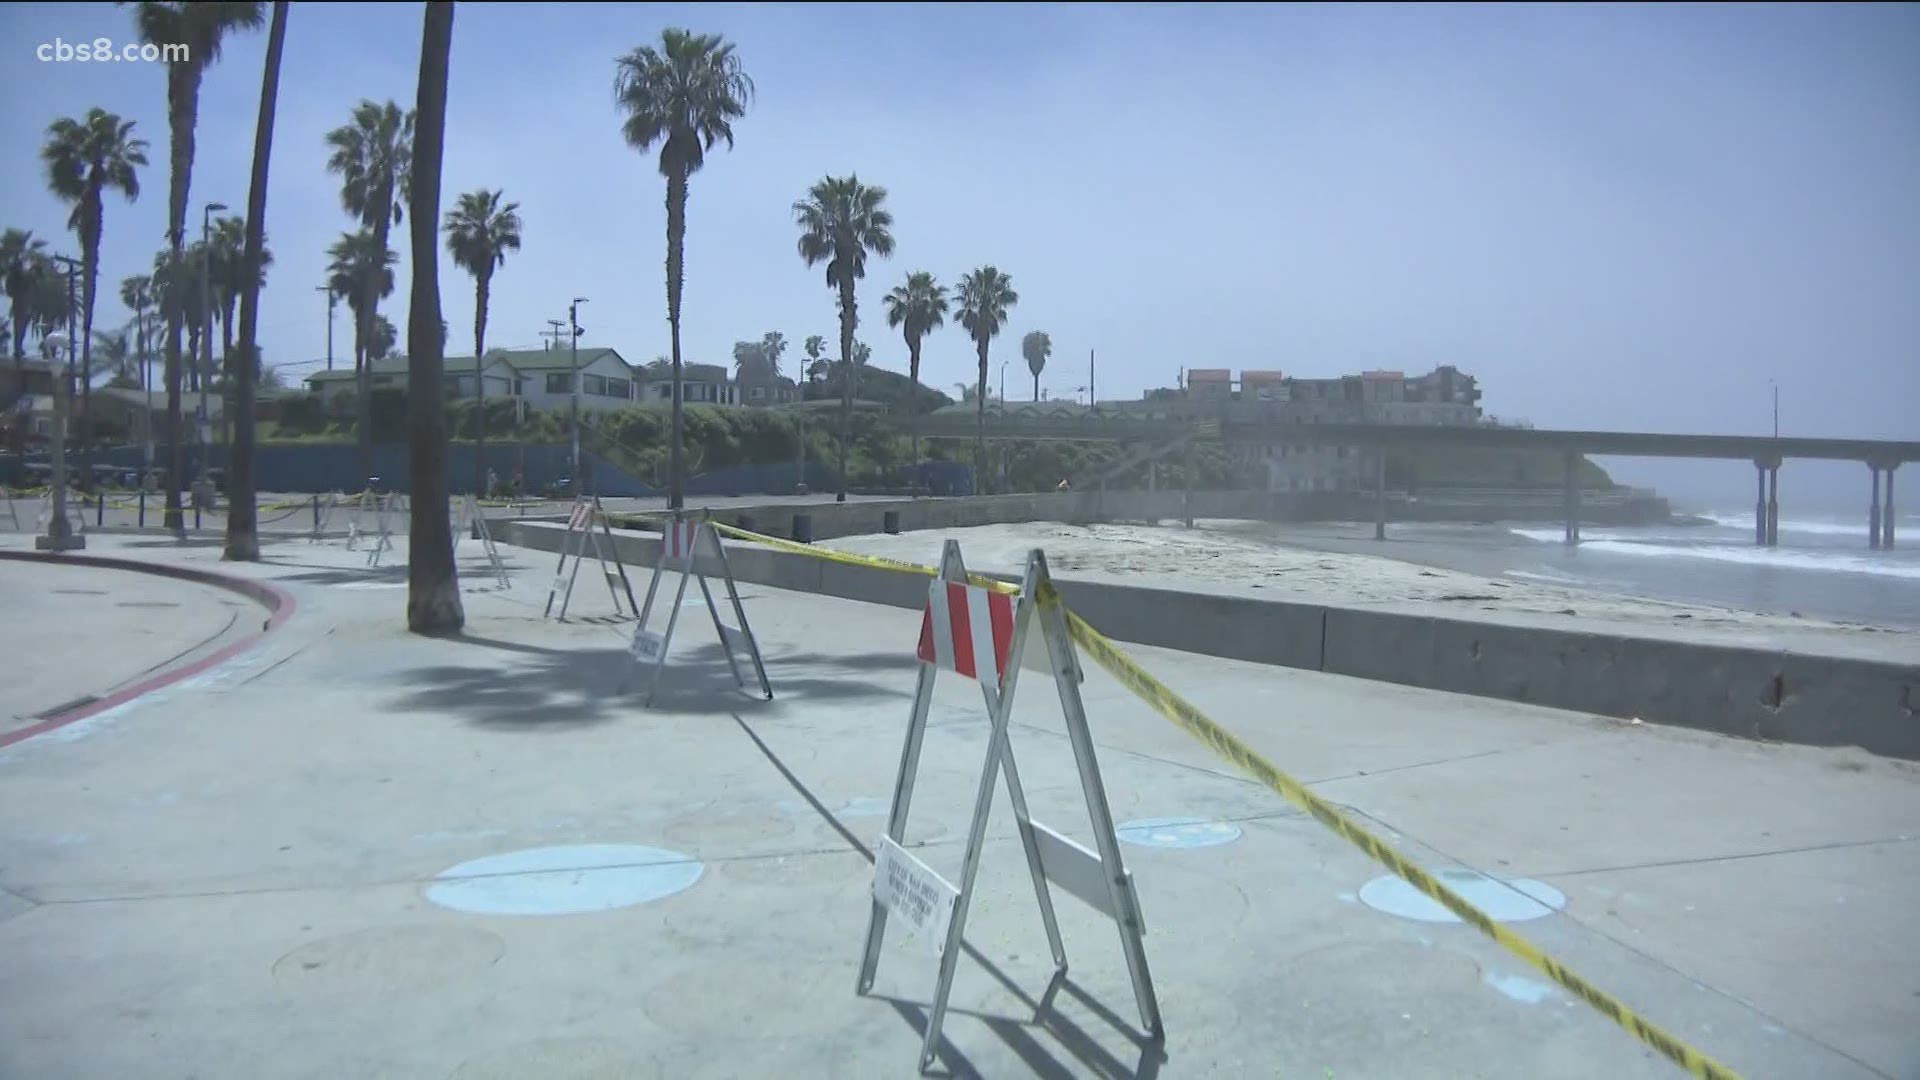 News 8's Tim Blodgett breaks down the new beach rules and talks to lifeguards about what people should do during the heat.